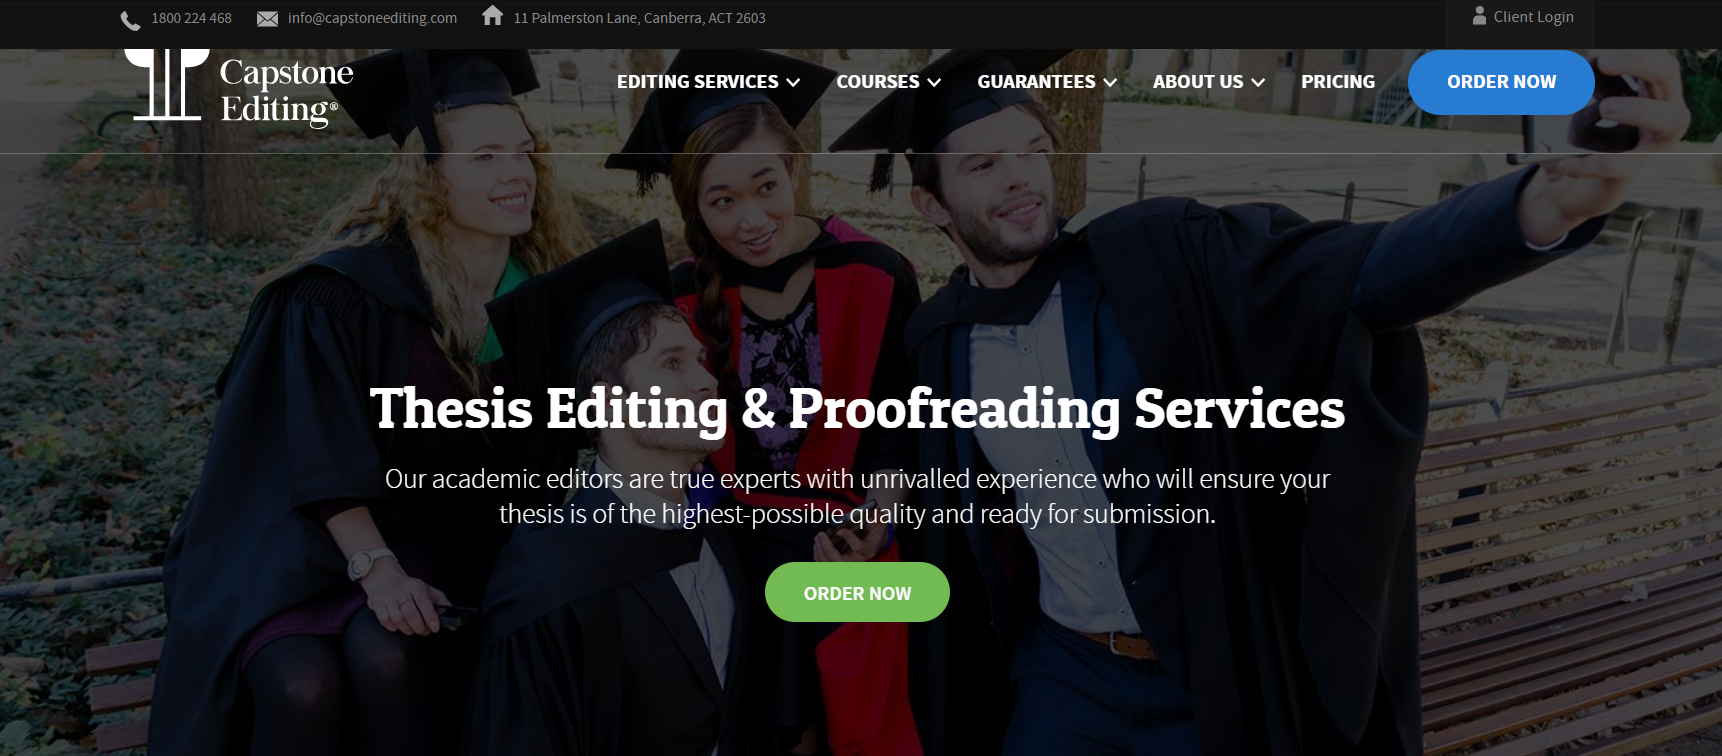 Capstone editing home service page.